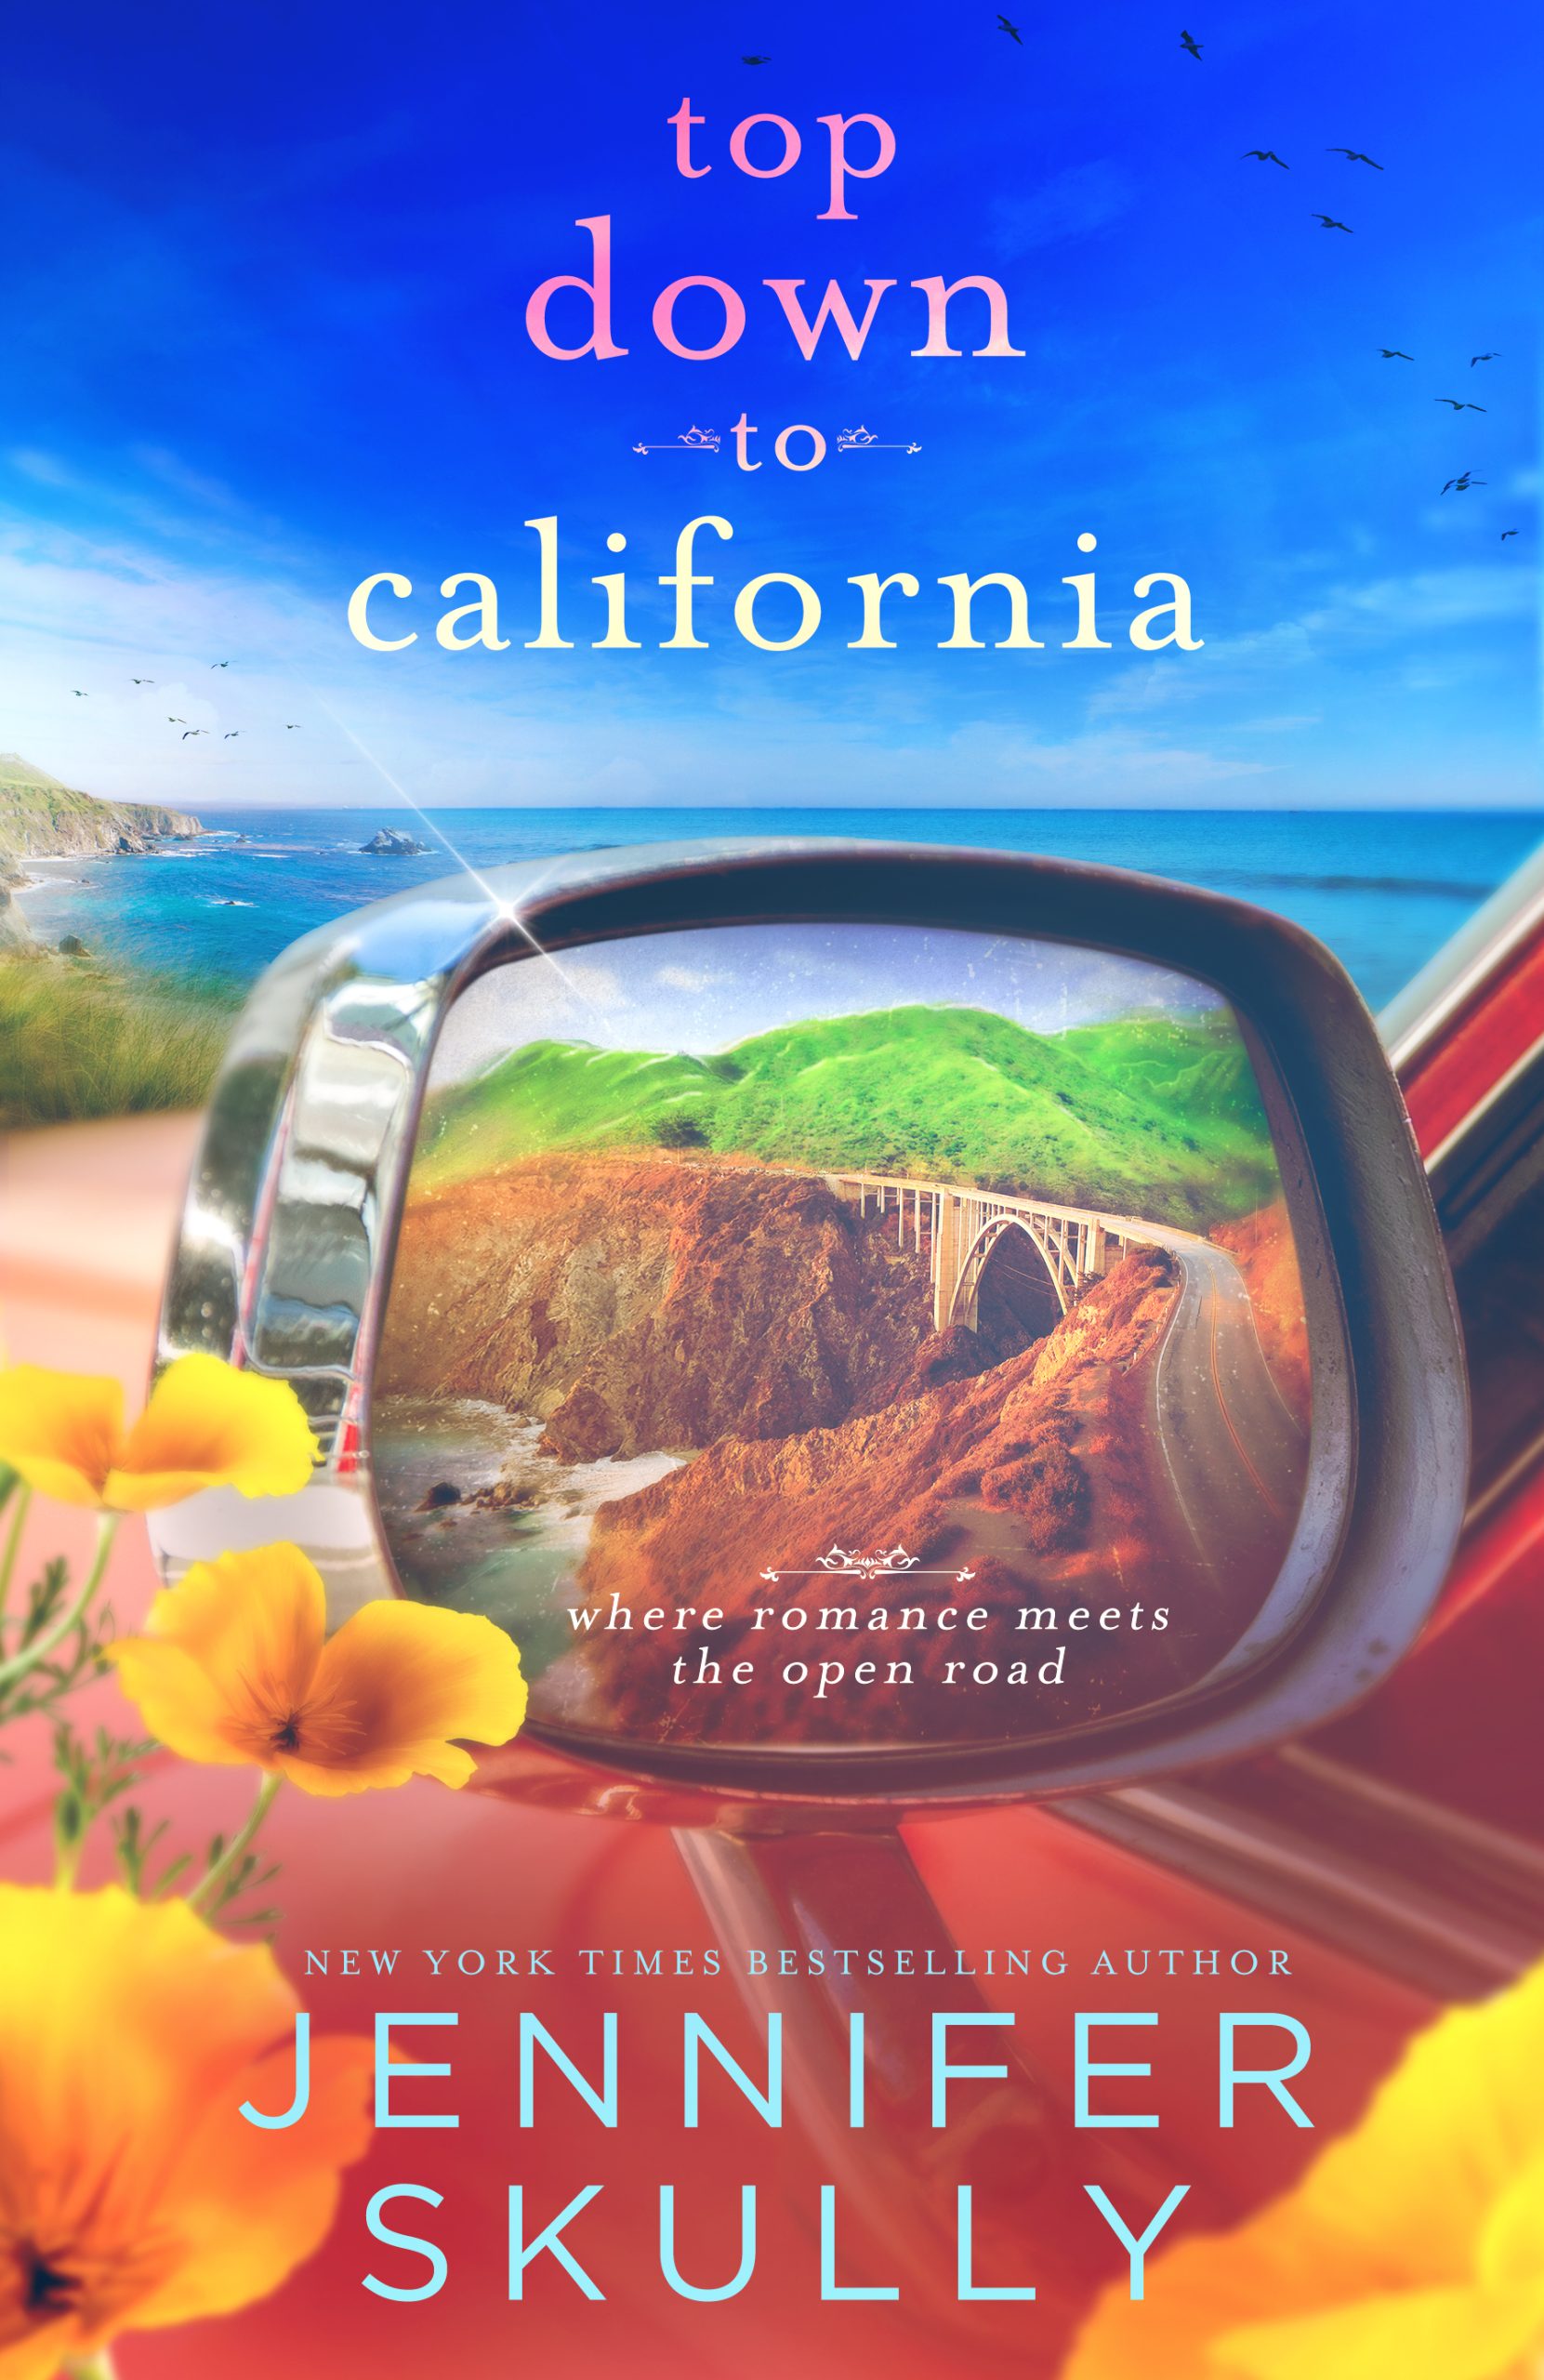 Cover of Top Down to California - where romance meets the open road - by New York Times Bestselling Author Jennifer Skully